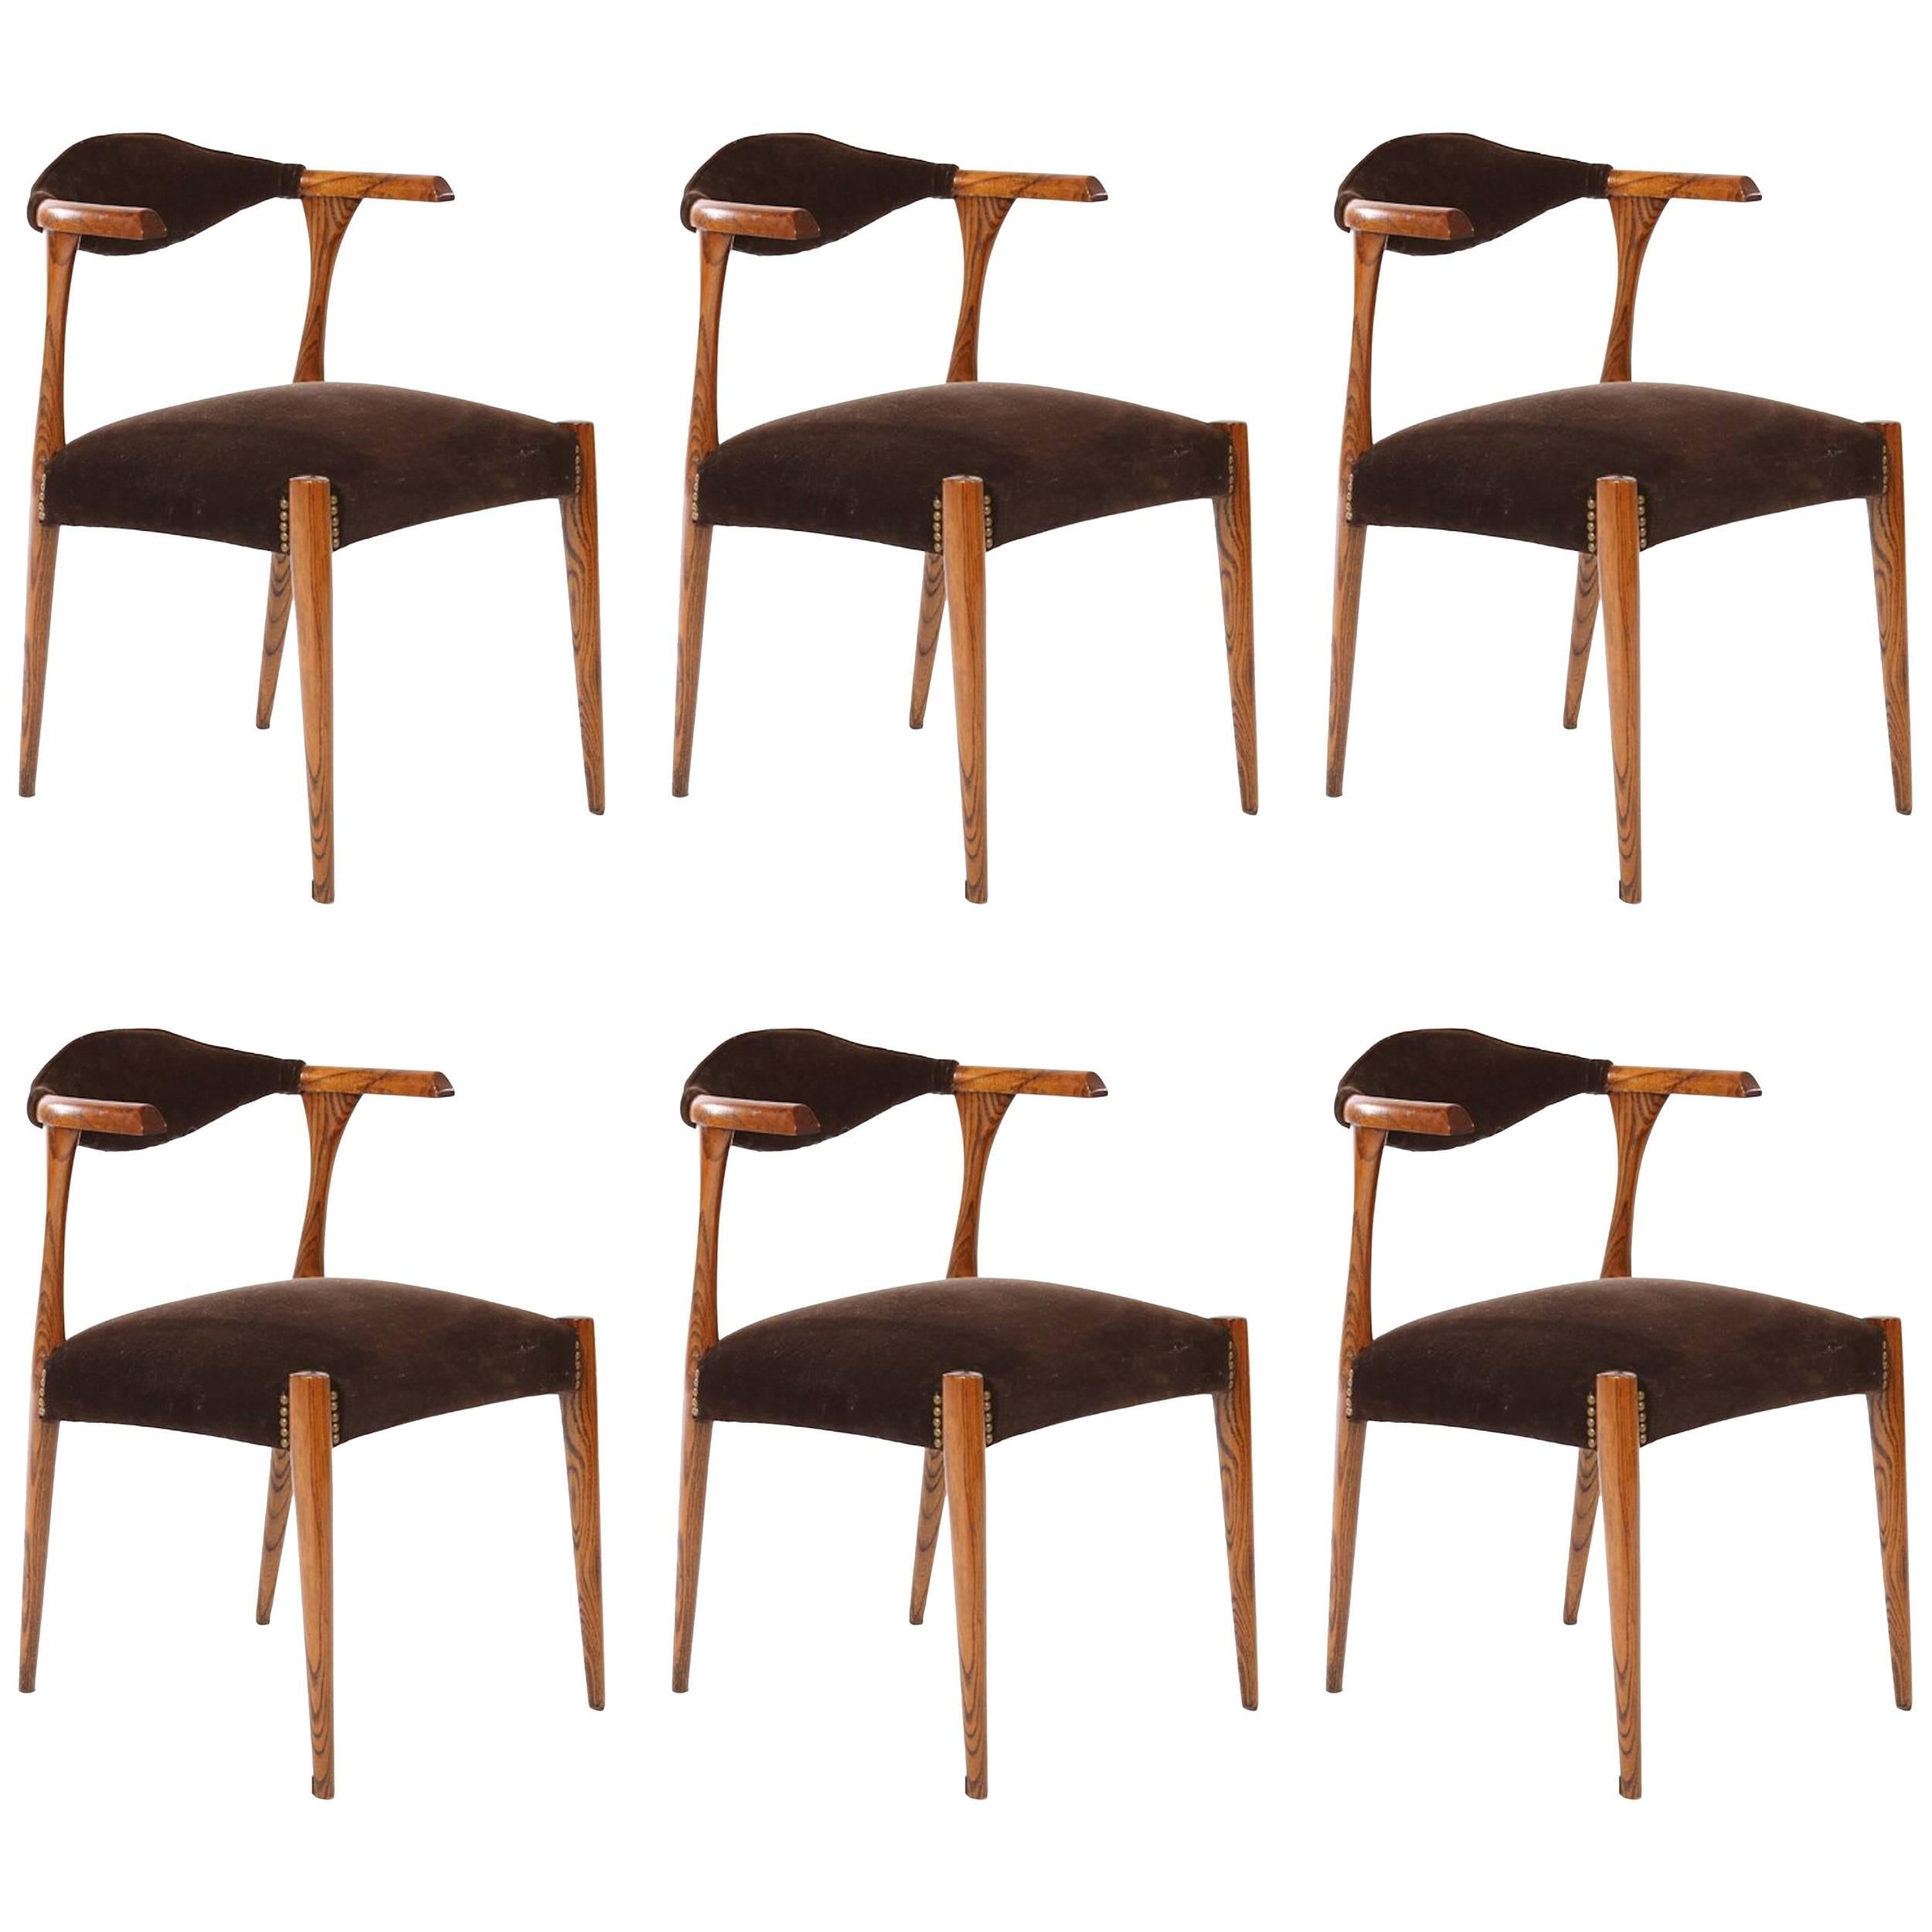 Cabinetmaker Chairs
Denmark, c. 1960

Set of six available- will split set. Oak frame, upholstered back over nailhead trimmed upholstered seats.  Recently reupholstered in chocolate brown cotton velvet.

Dimensions: 30